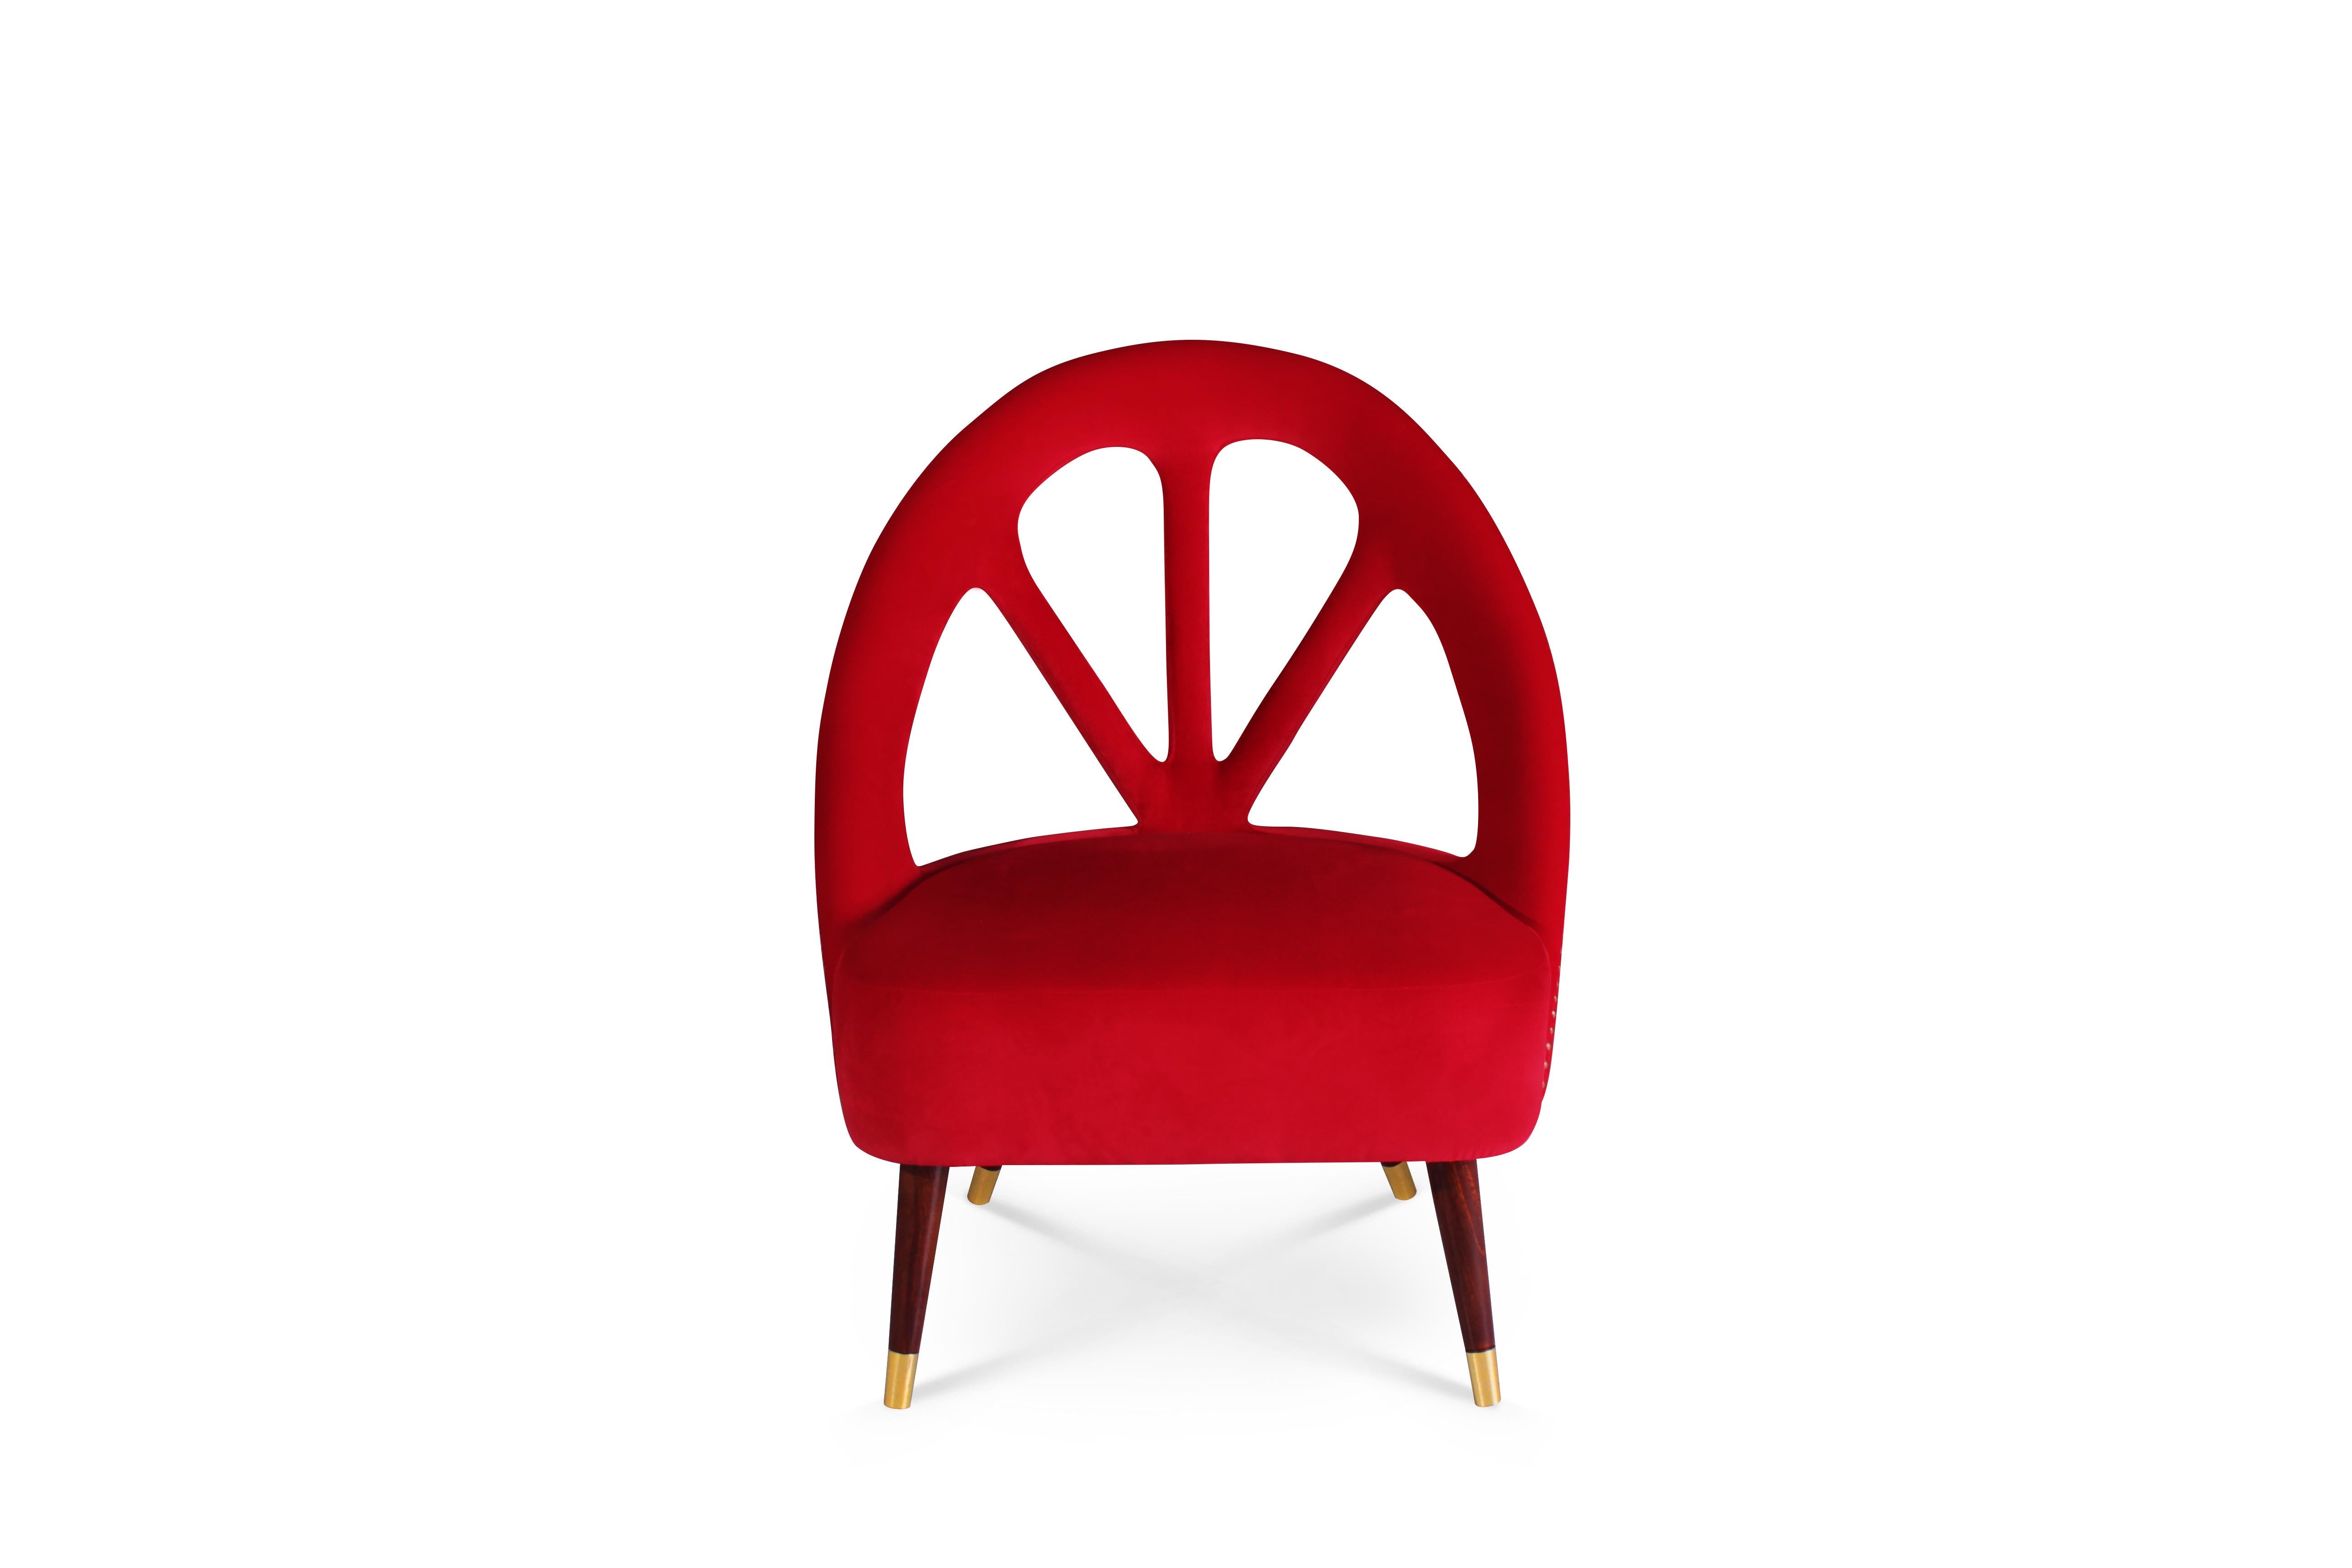 Scarlet is a bright and vivid reddish color that emanates passion, love, and seduction. Inspired by such color, Ottiu designed the Scarlet Mid-Century Modern Armchair. Its eclectic and unique back will give your living room set an entirely new